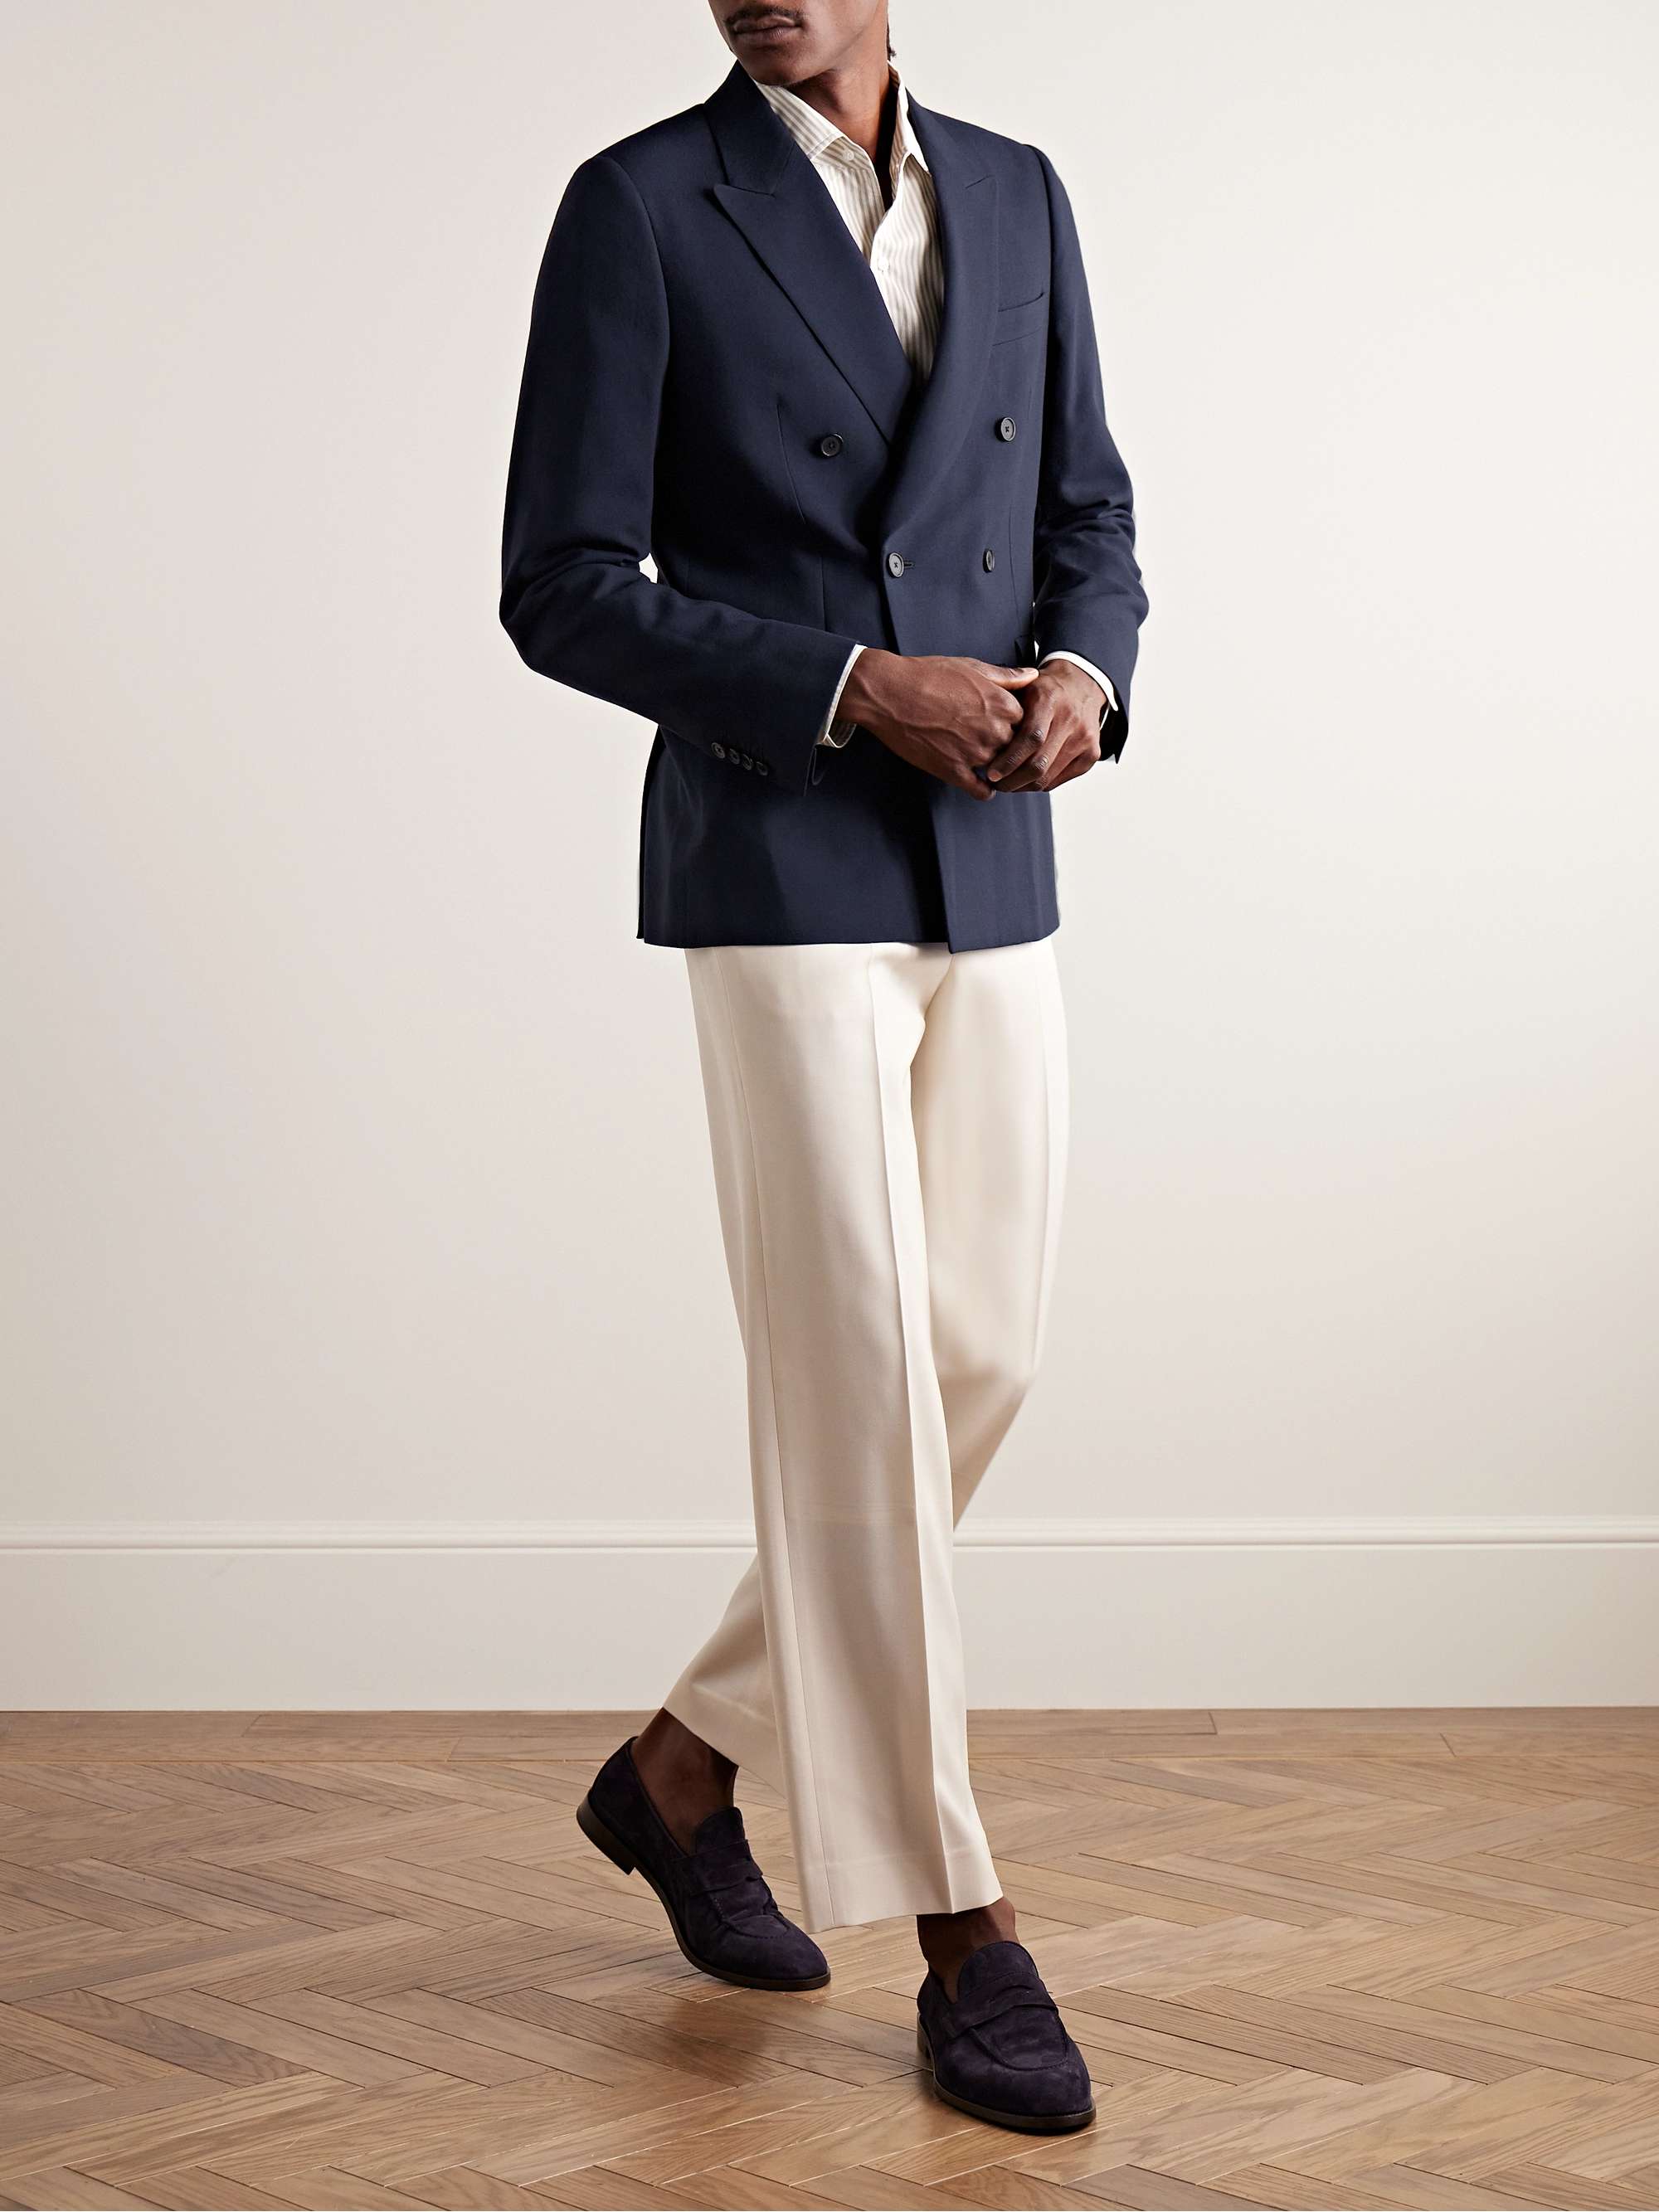 PAUL SMITH Slim-Fit Double-Breasted Wool Suit Jacket for Men | MR PORTER